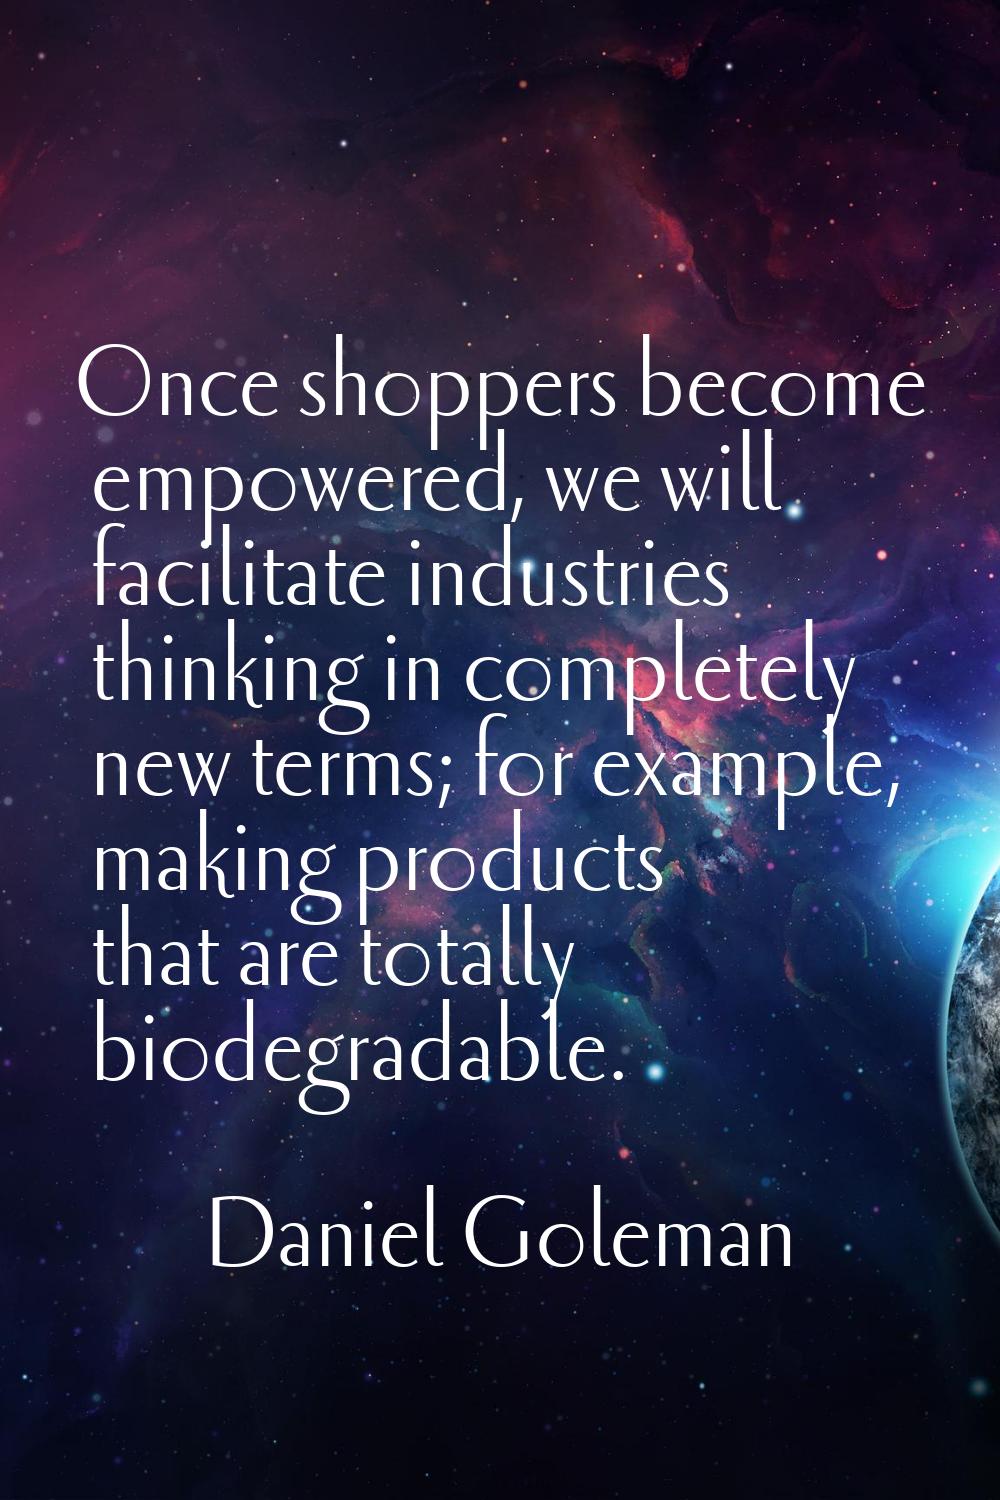 Once shoppers become empowered, we will facilitate industries thinking in completely new terms; for